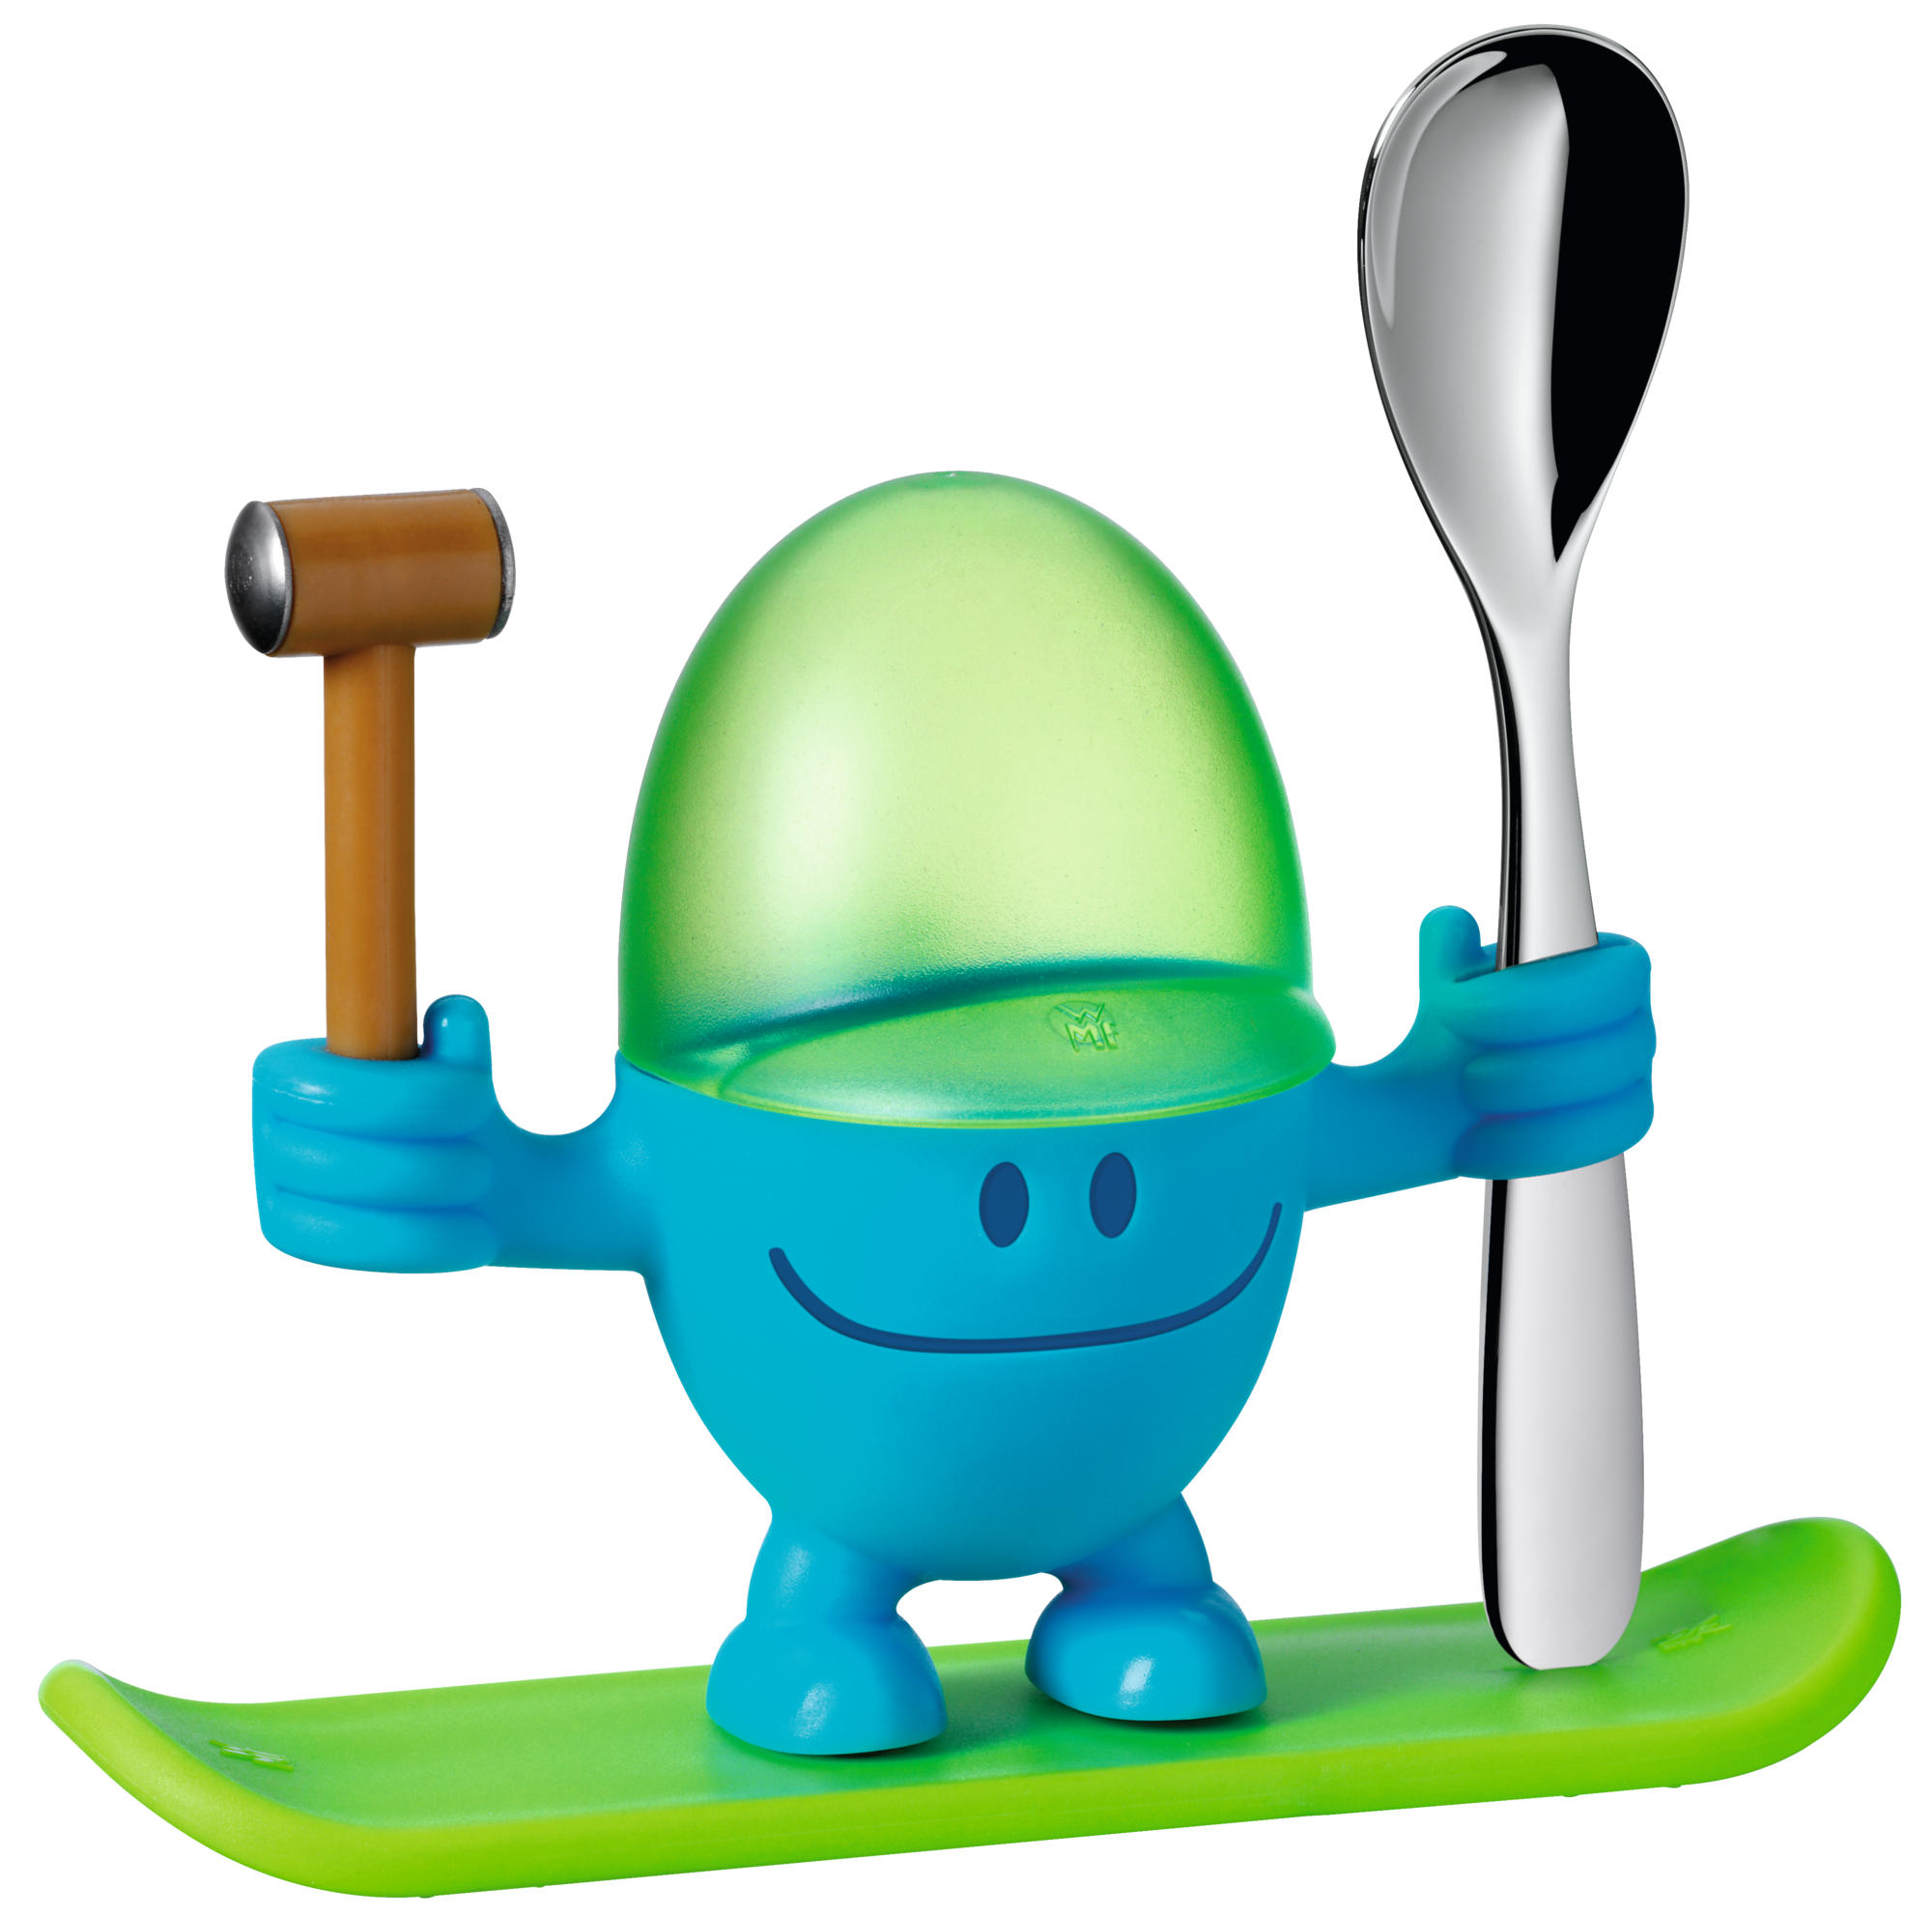 Egg cup set McEgg with spoon, blue 2-piece